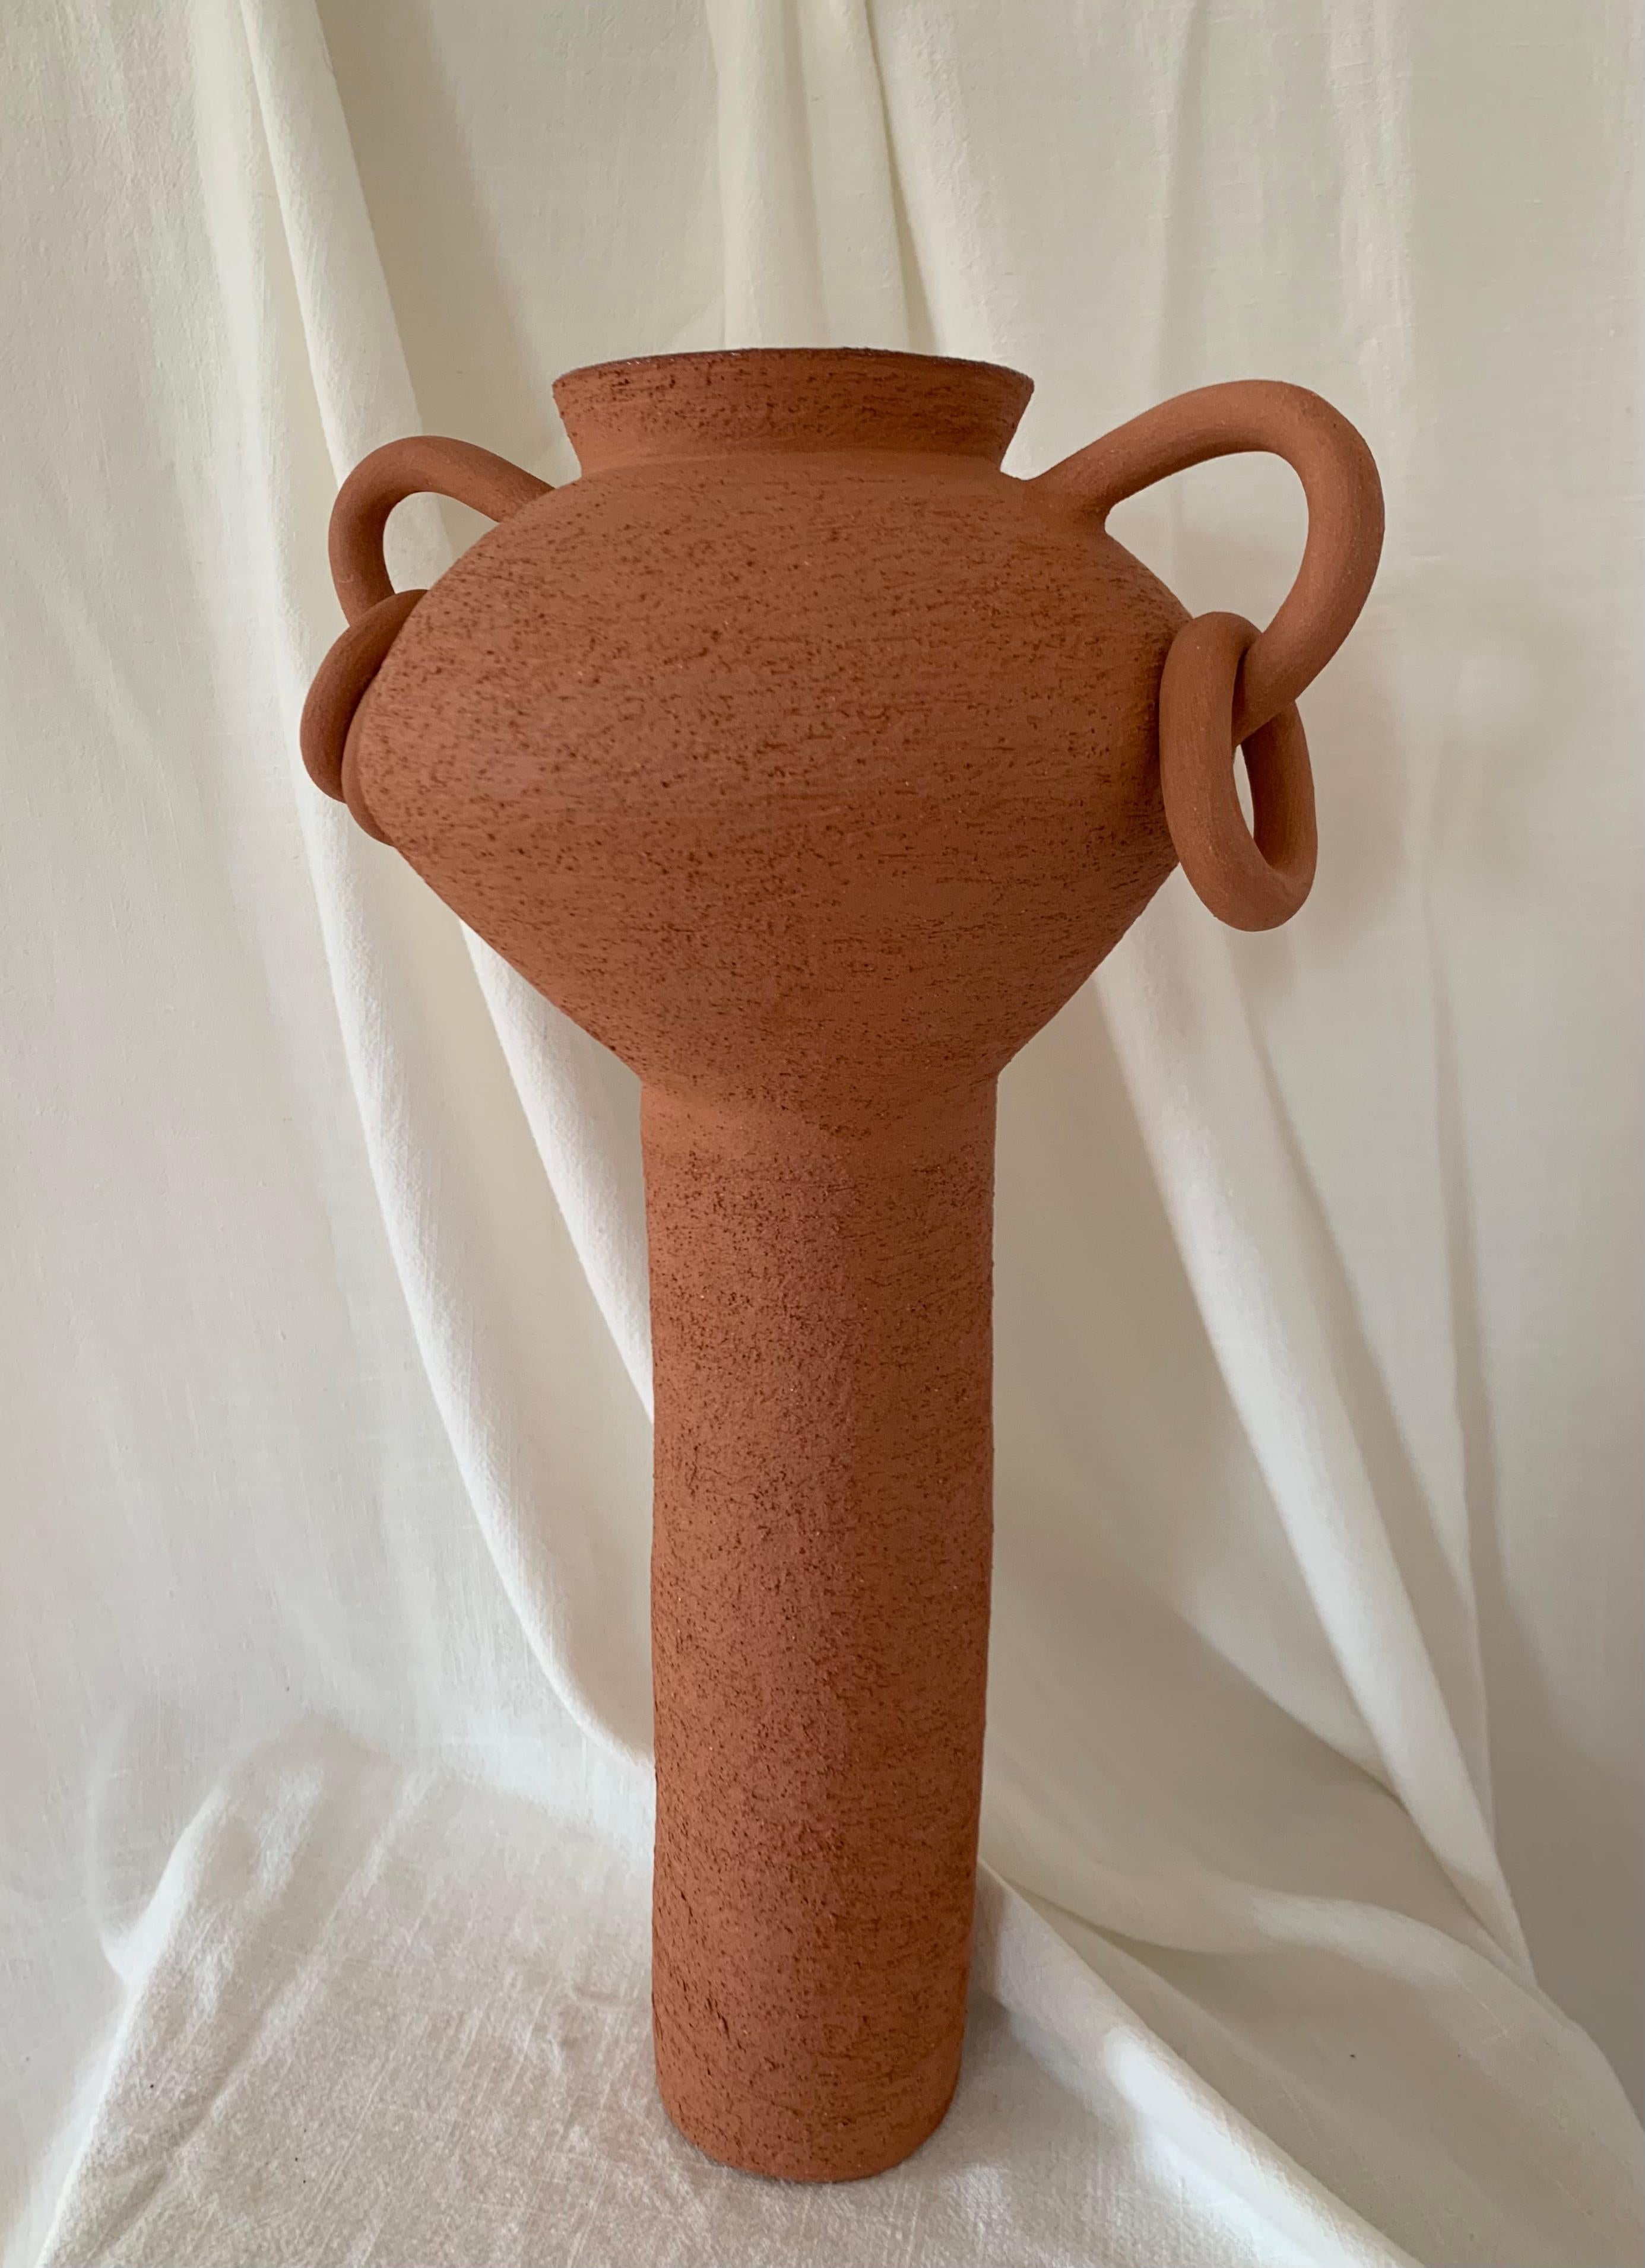 Brutalist Contemporary Ruby Bell Ceramics Terracotta Pedestal Vase with Handles and Rings